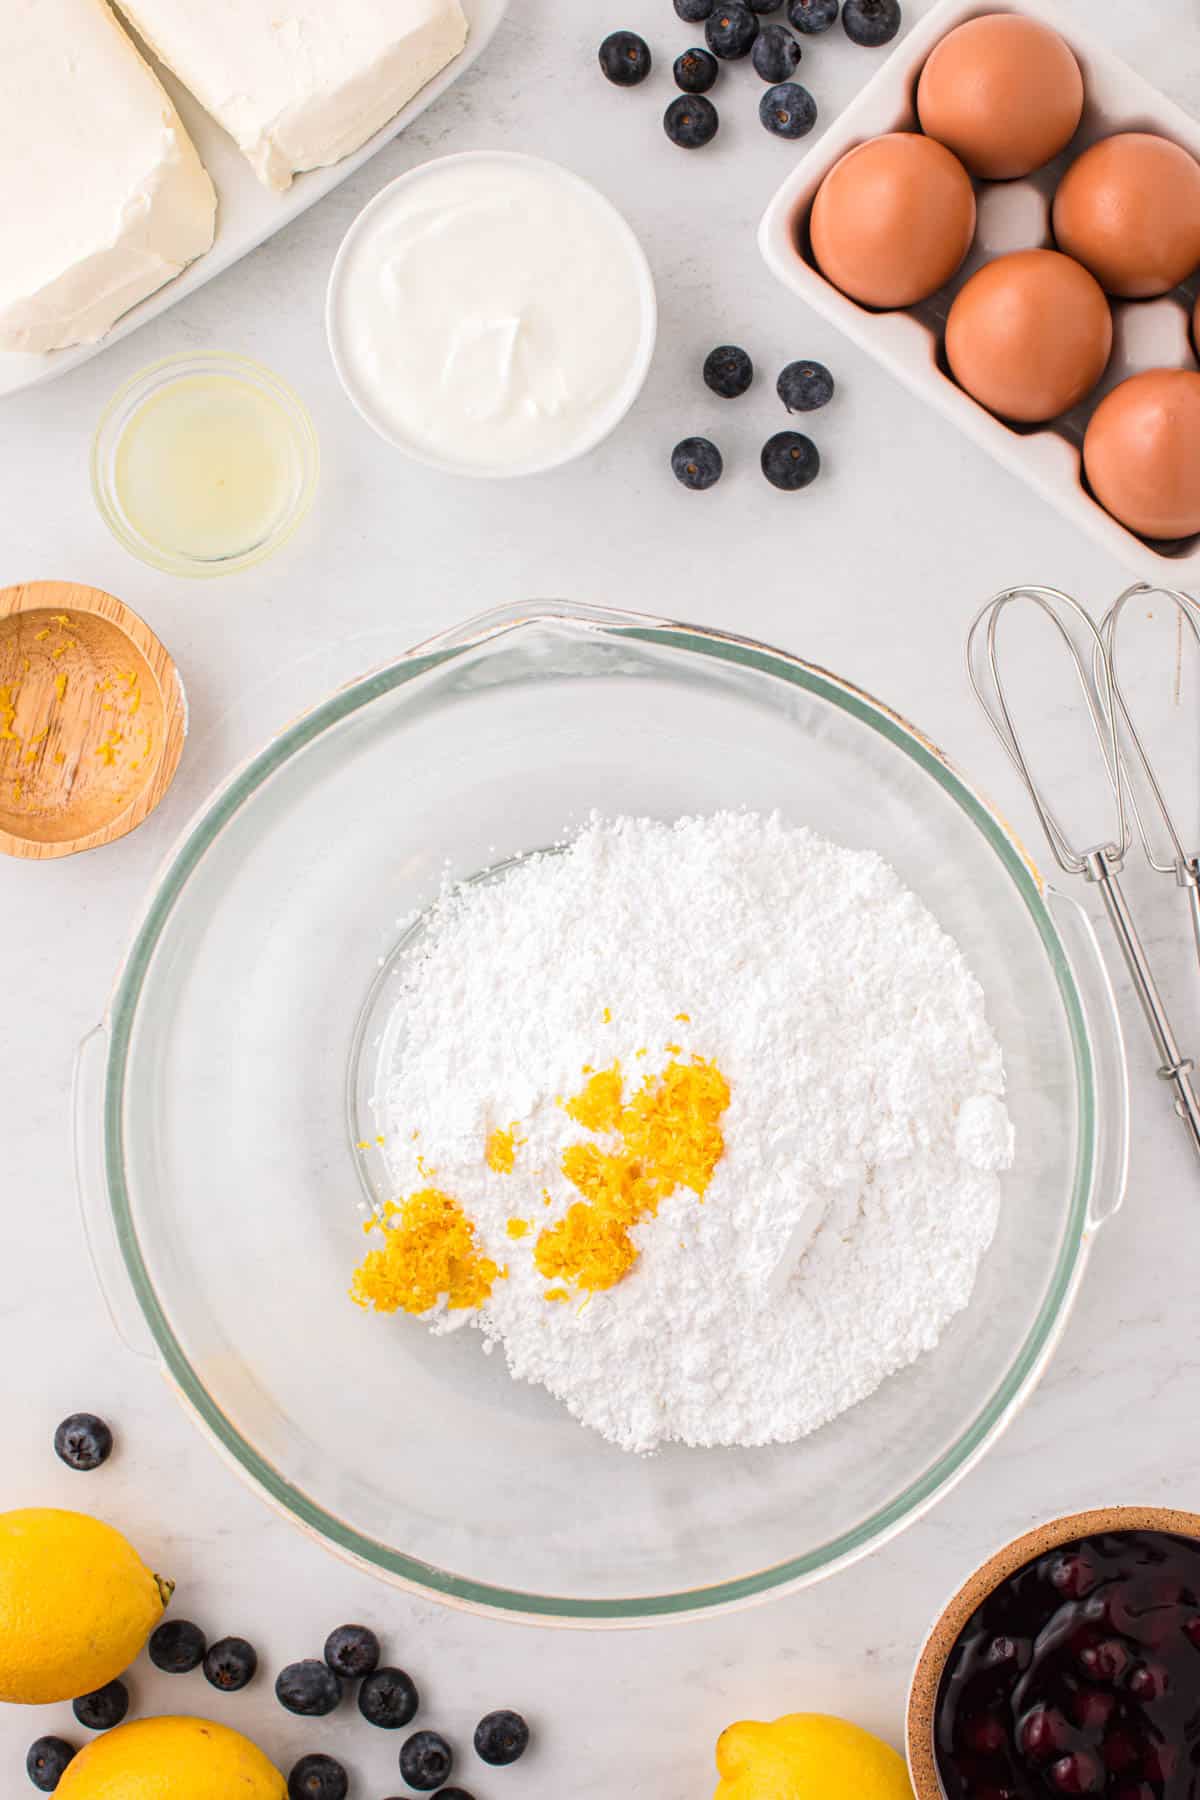 Combining lemon zest and powdered sugar in a bowl.